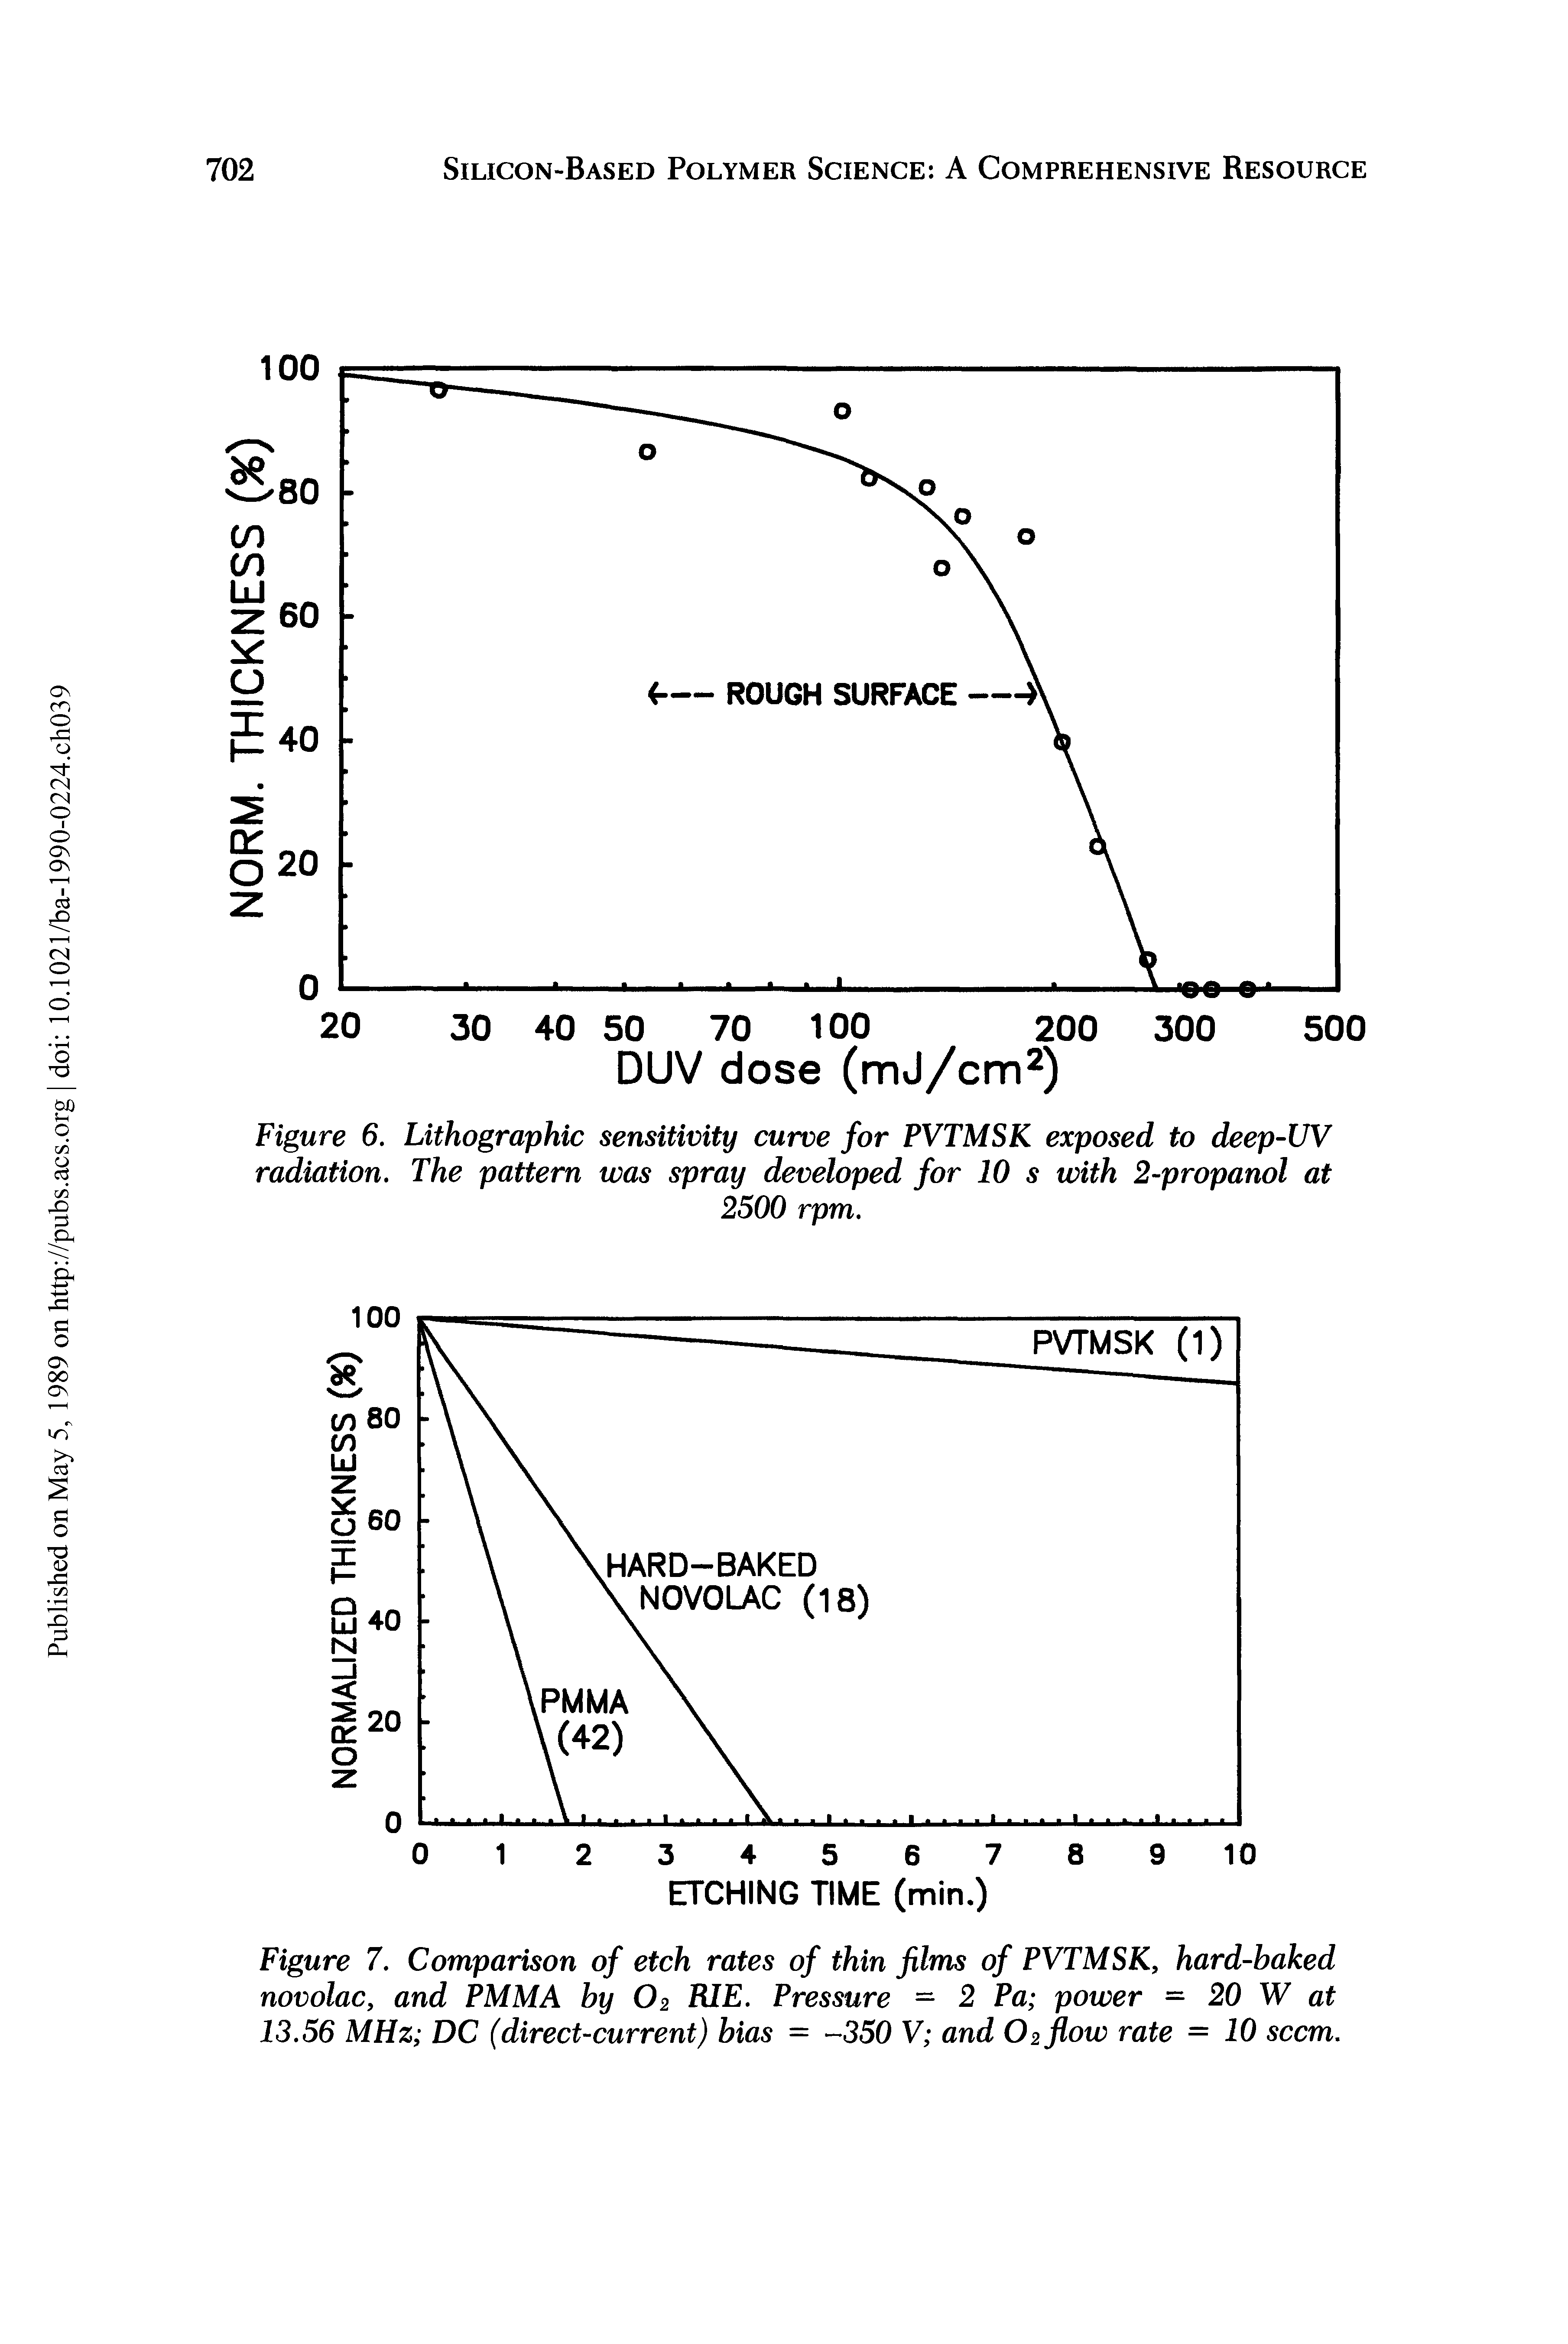 Figure 6. Lithographic sensitivity curve for PVTMSK exposed to deep-UV radiation. The pattern was spray developed for 10 s with 2-propanol at...